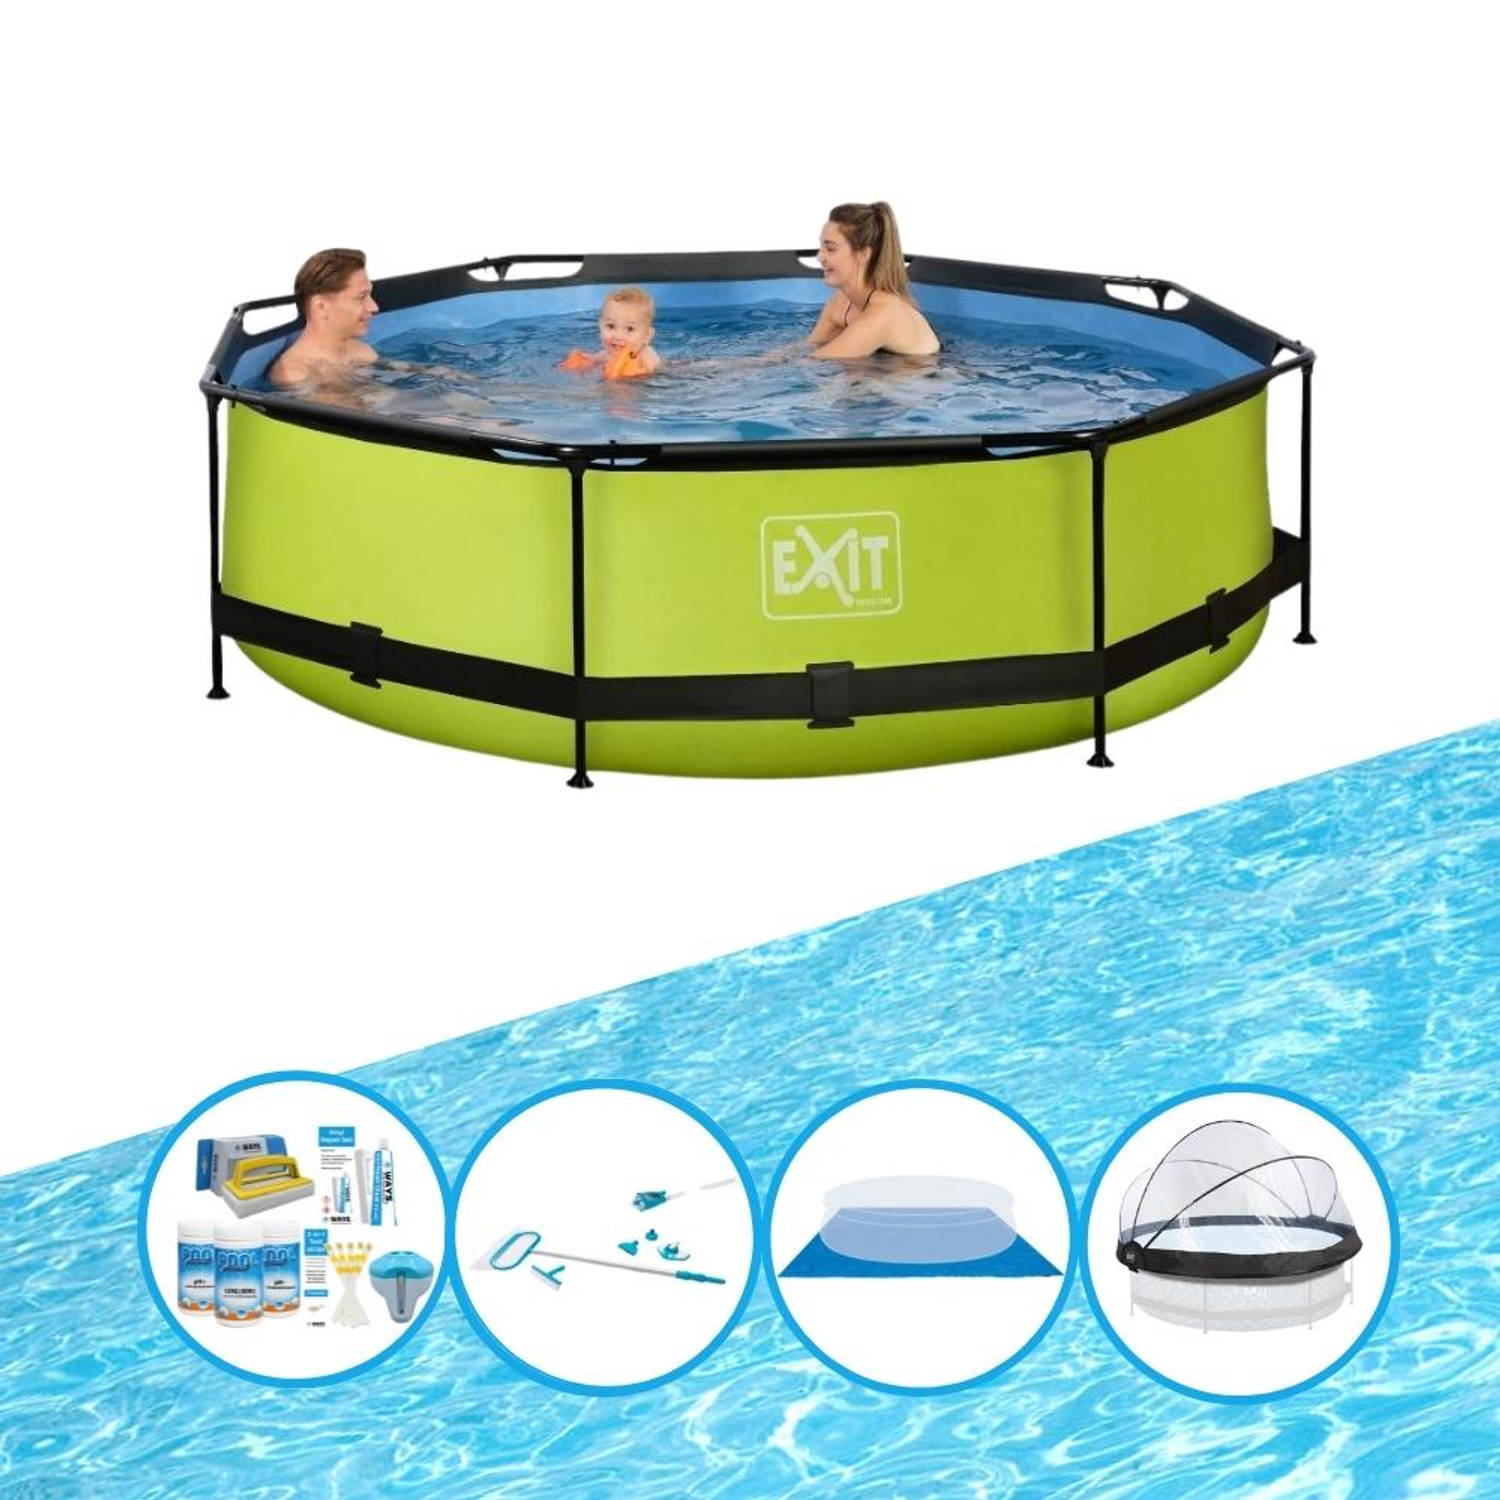 EXIT Toys Exit Zwembad Lime - ø300x76 Cm - Frame Pool - Compleet Zwembadpakket - Groen